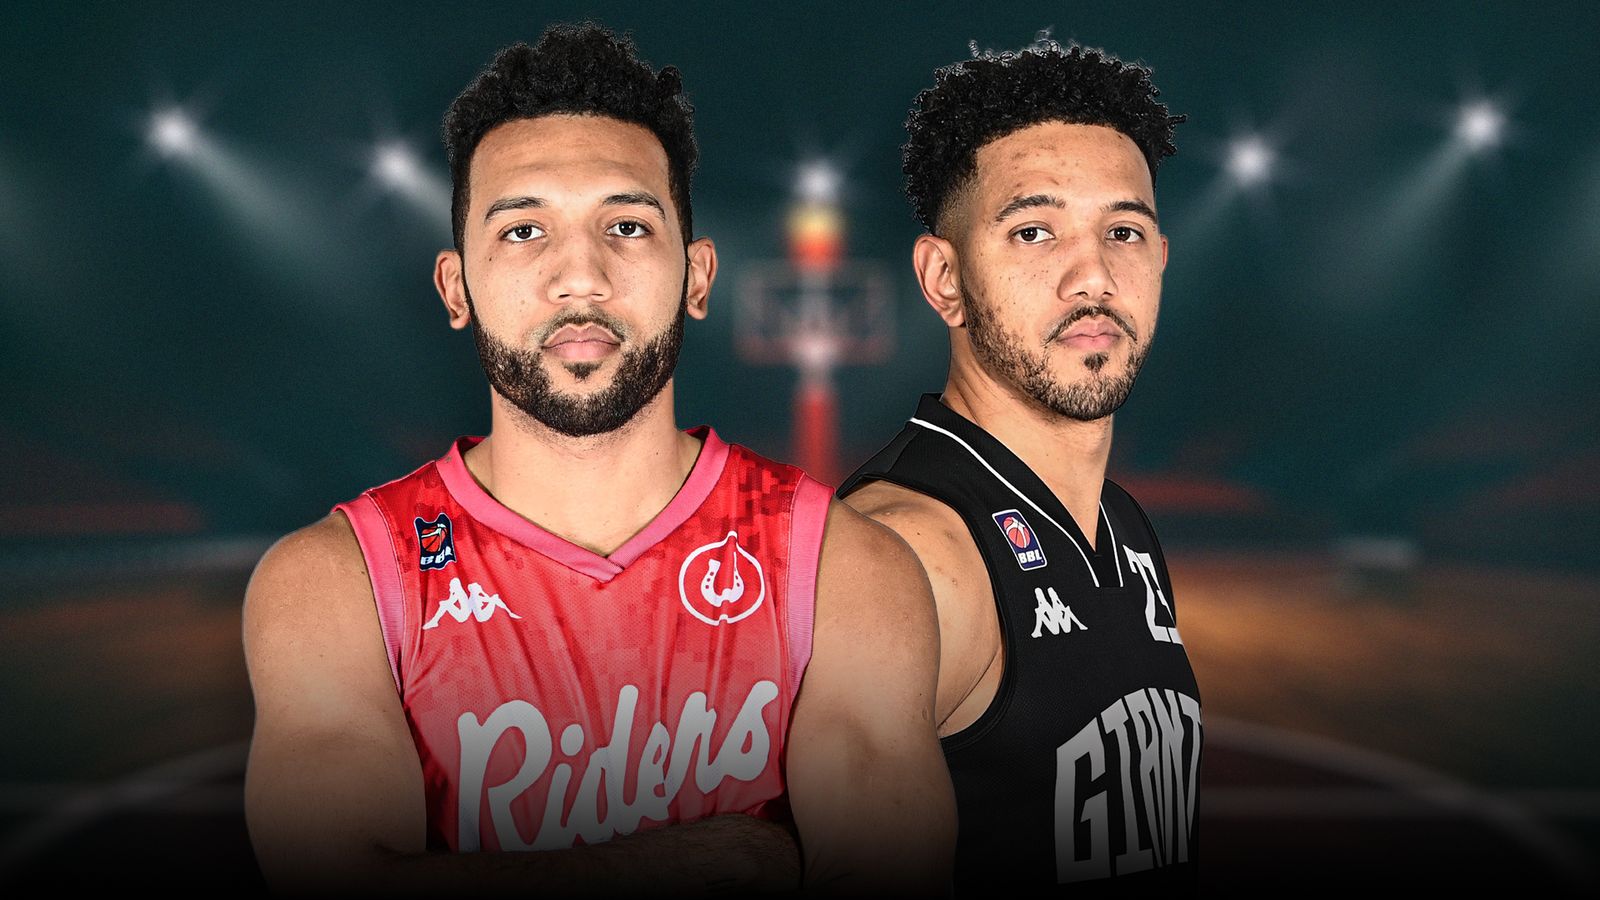 BBL Cup final: Brothers Patrick and Jordan Whelan battling each other as Leicester Riders face Manchester Giants